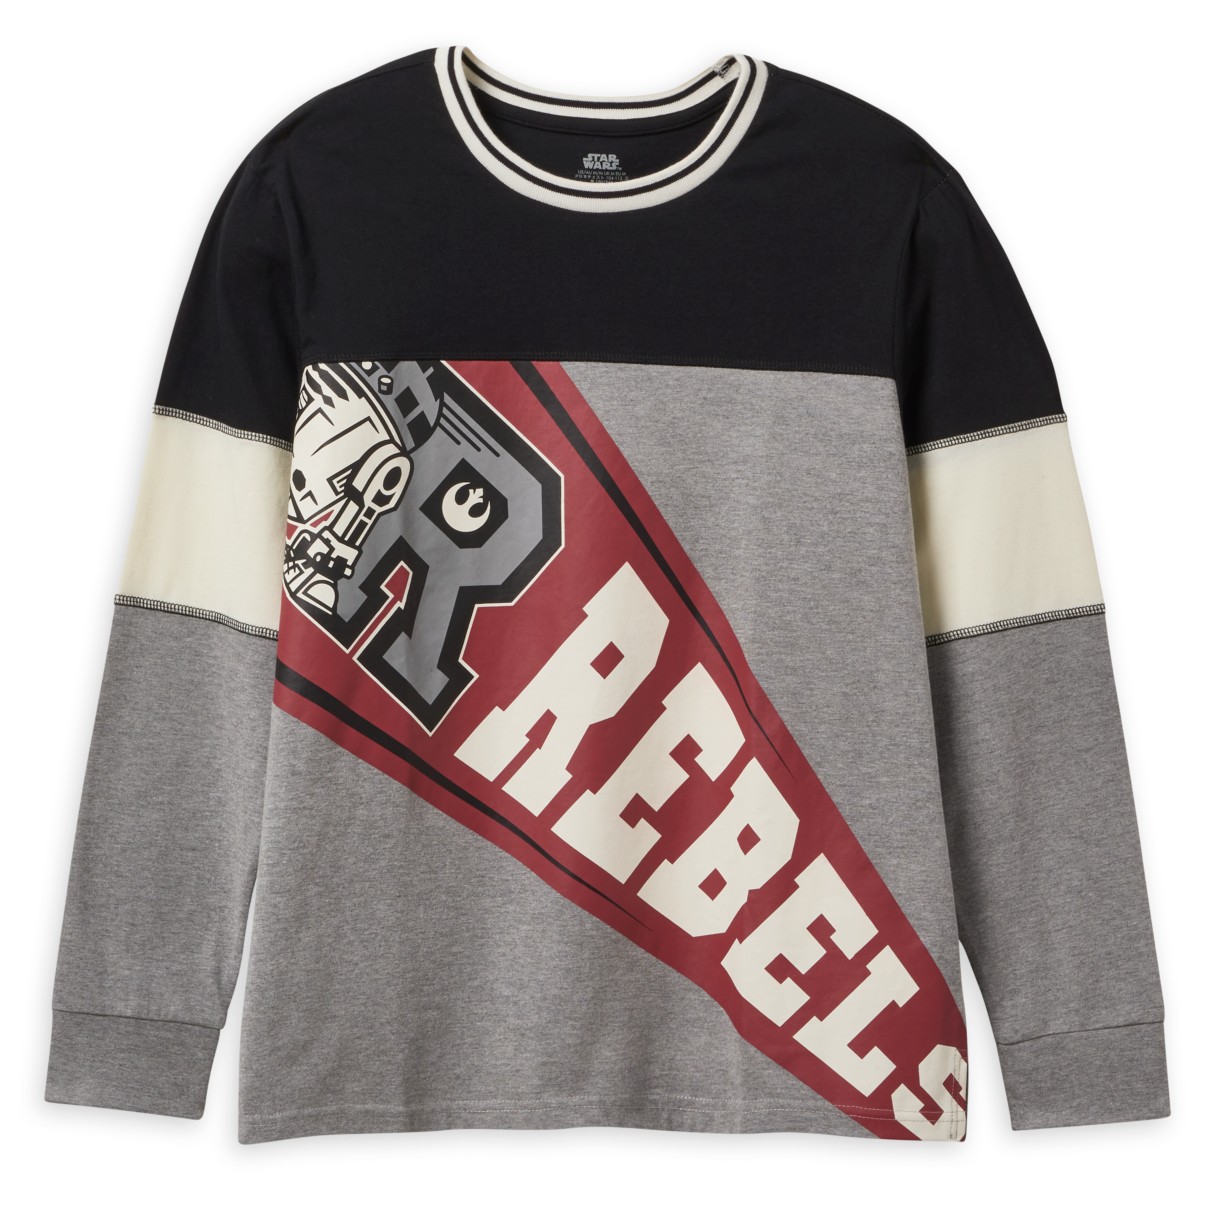 R2-D2 ''Rebels'' Pullover Sweatshirt for Adults – Star Wars